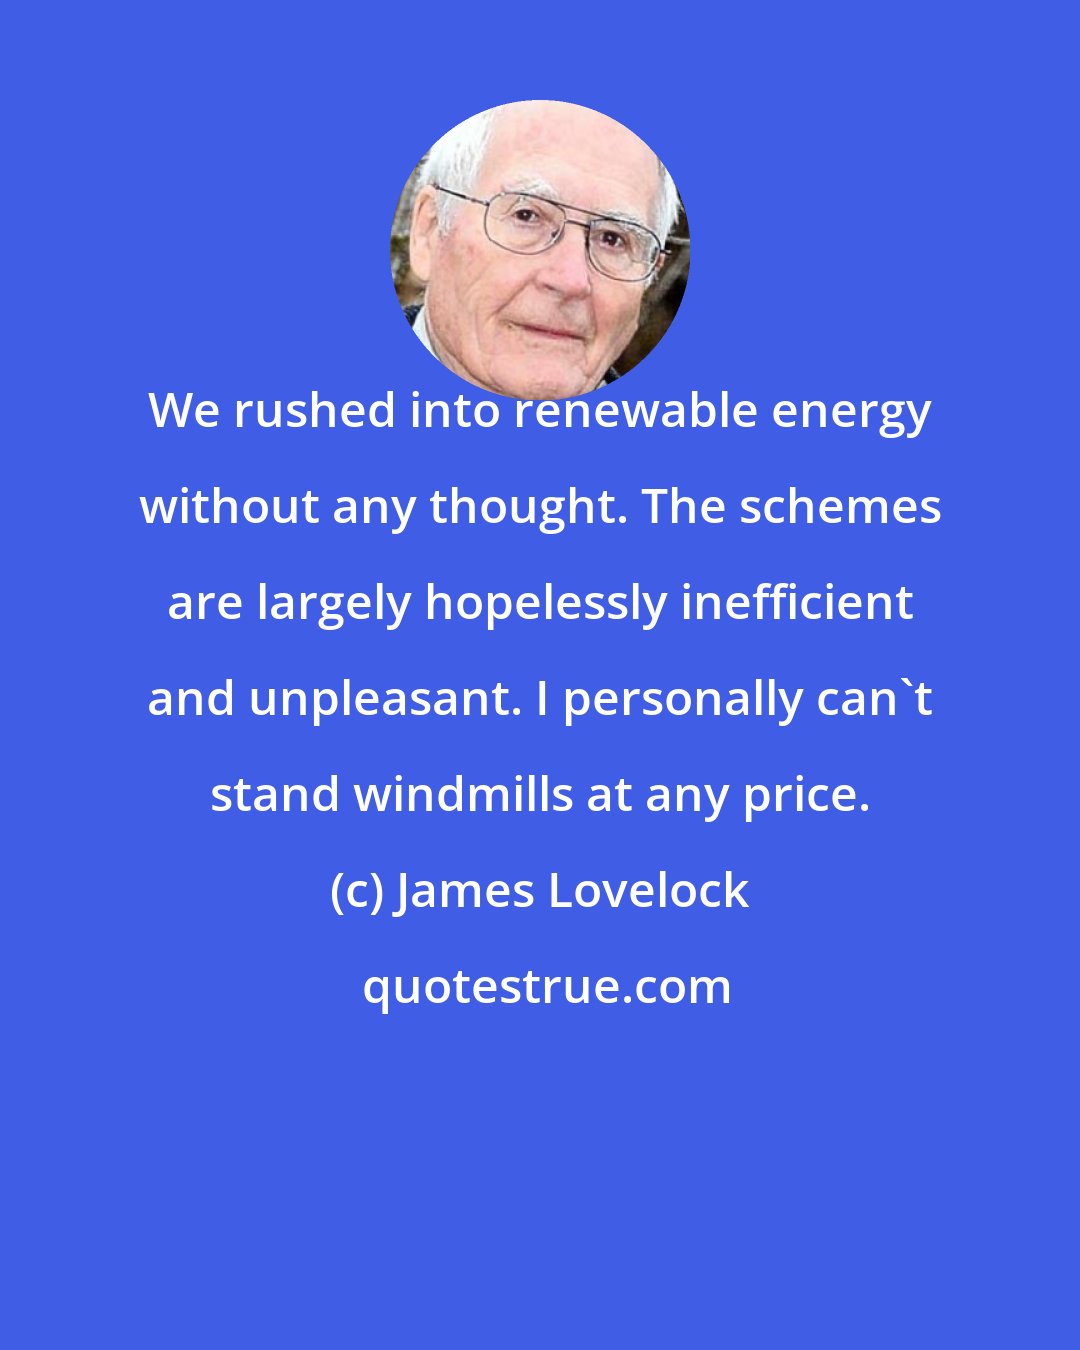 James Lovelock: We rushed into renewable energy without any thought. The schemes are largely hopelessly inefficient and unpleasant. I personally can't stand windmills at any price.